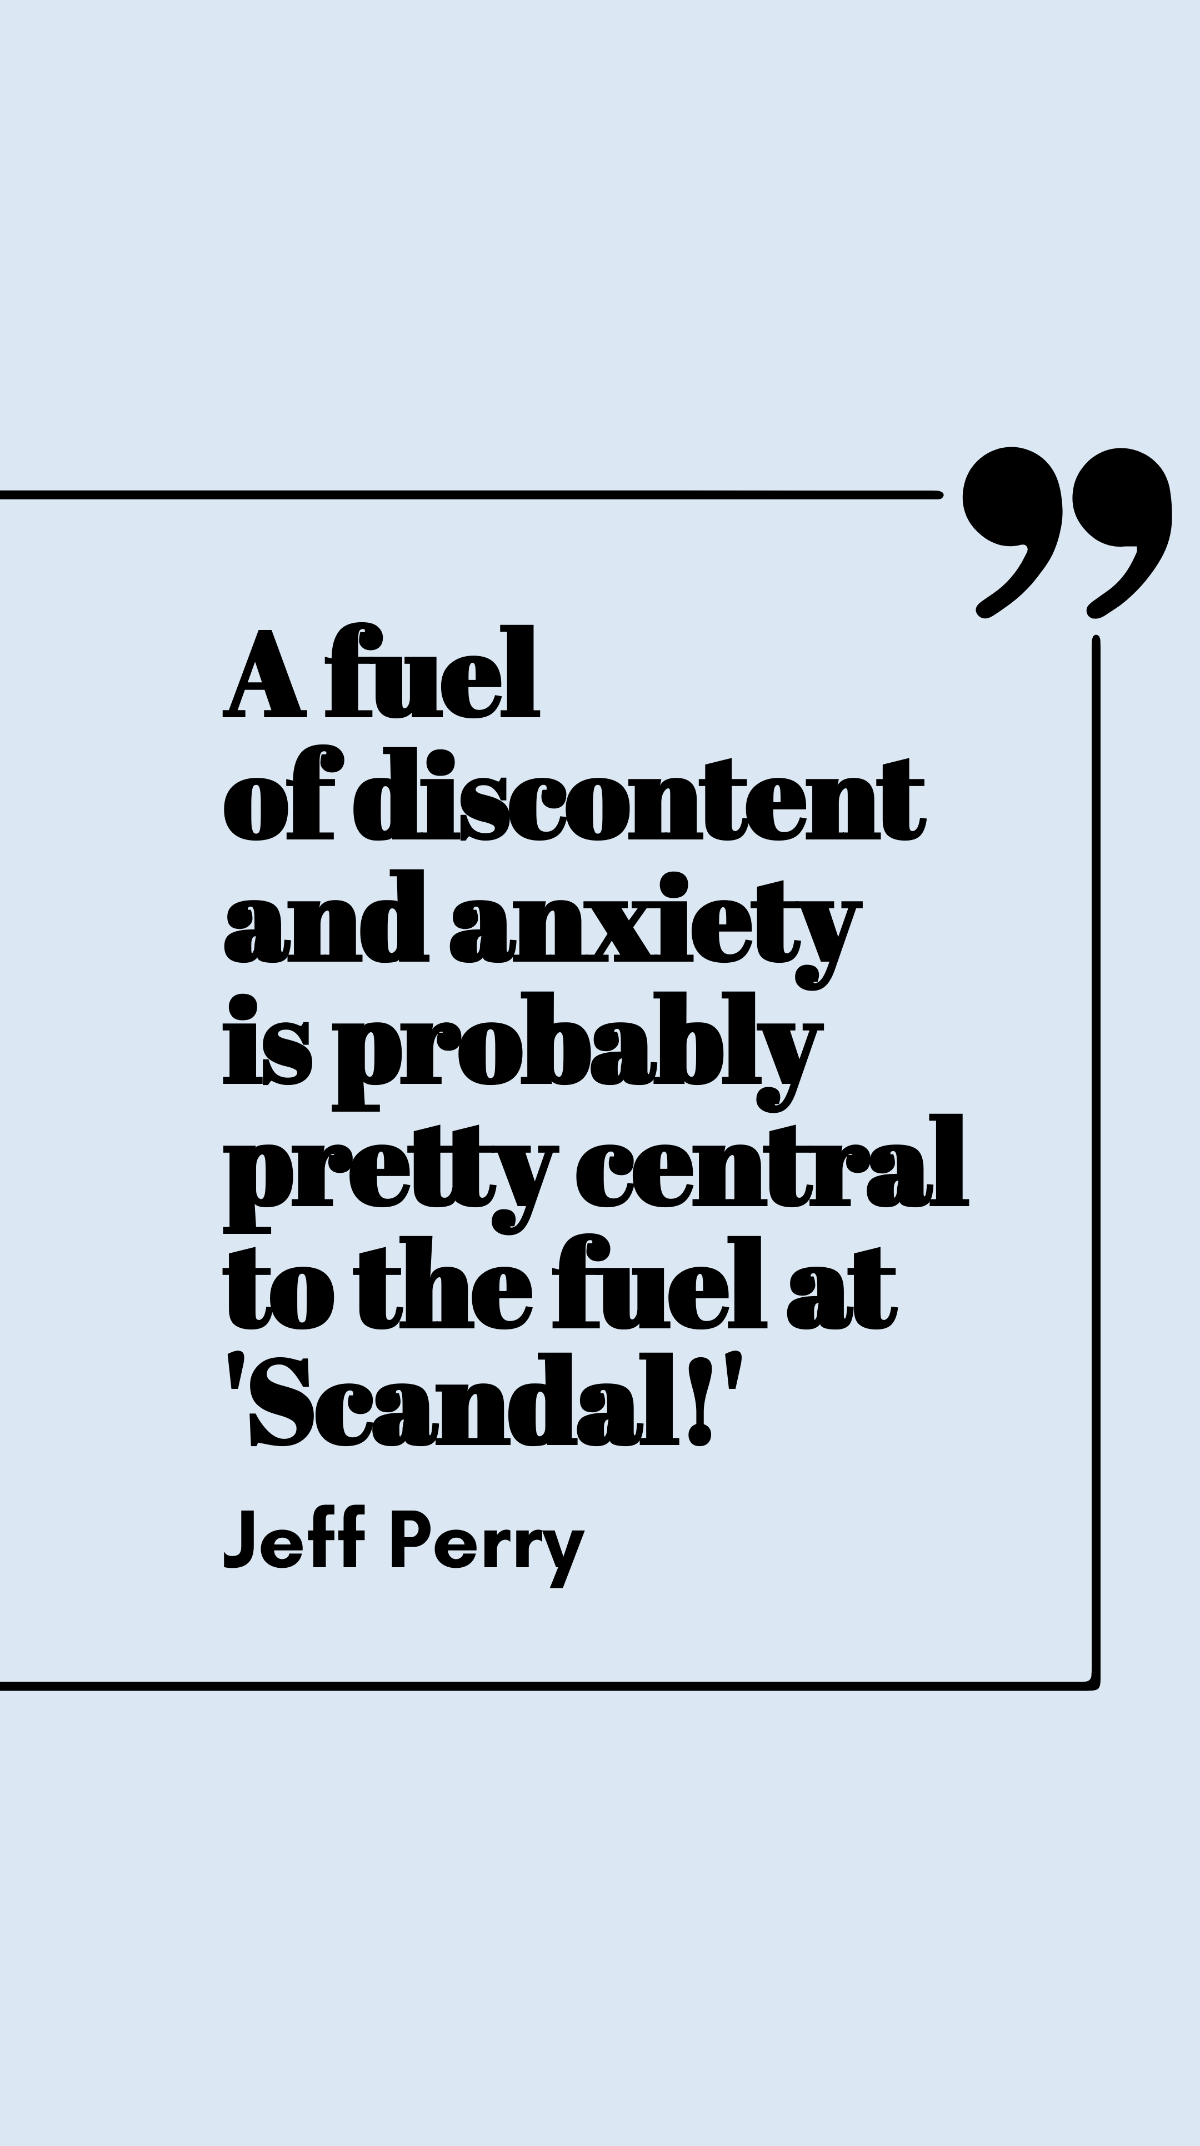 Jeff Perry - A fuel of discontent and anxiety is probably pretty central to the fuel at 'Scandal!' Template